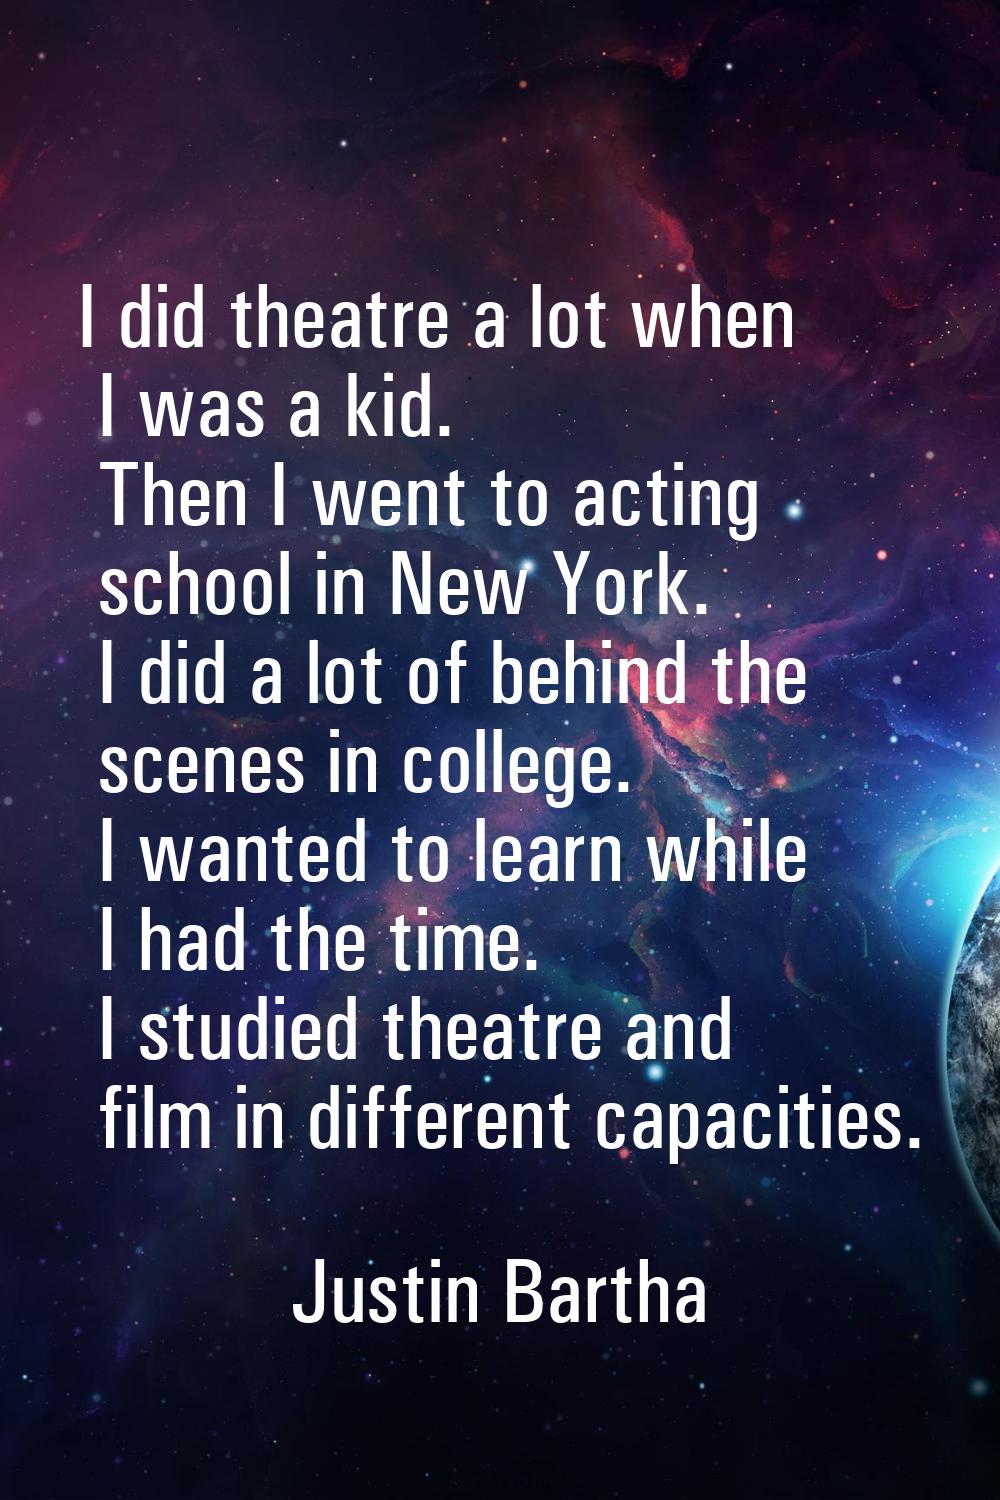 I did theatre a lot when I was a kid. Then I went to acting school in New York. I did a lot of behi